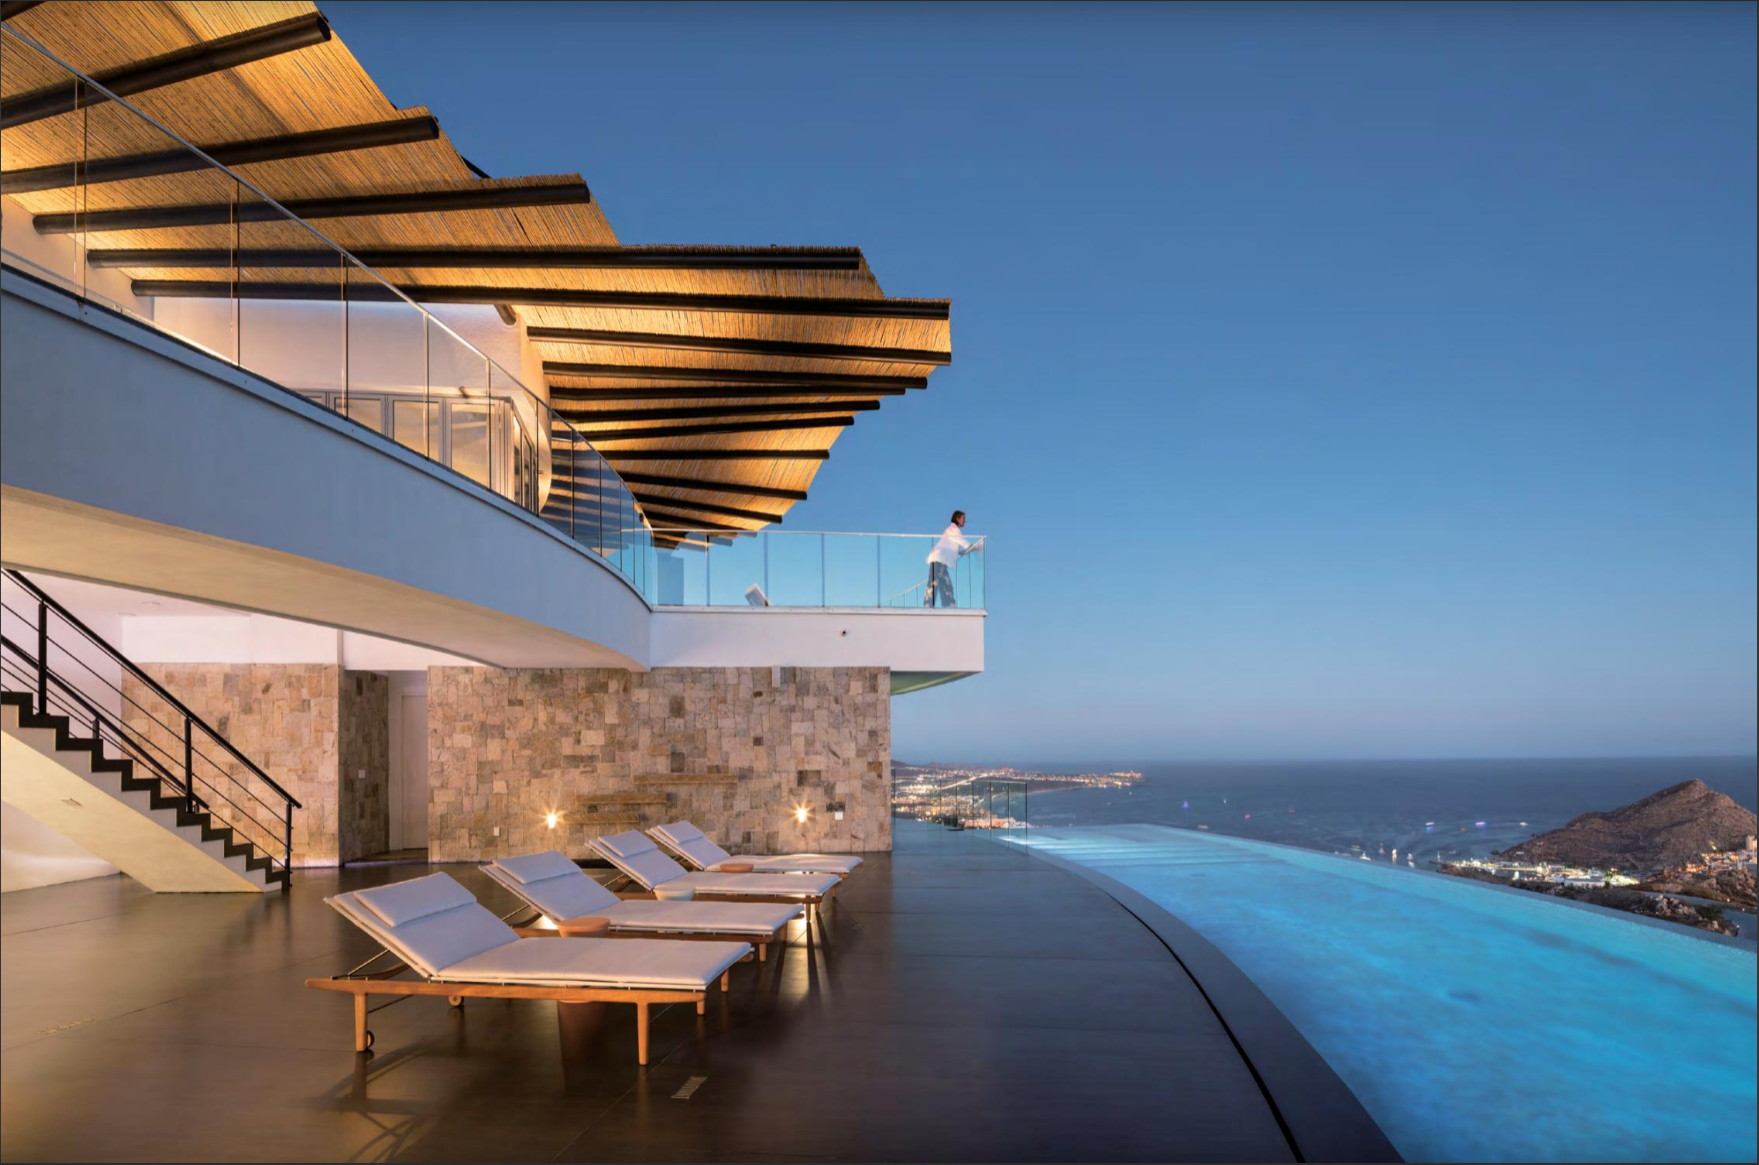  Infinity House : An Endless View_House_9781864708622_Images Publishing Group Pty Ltd 